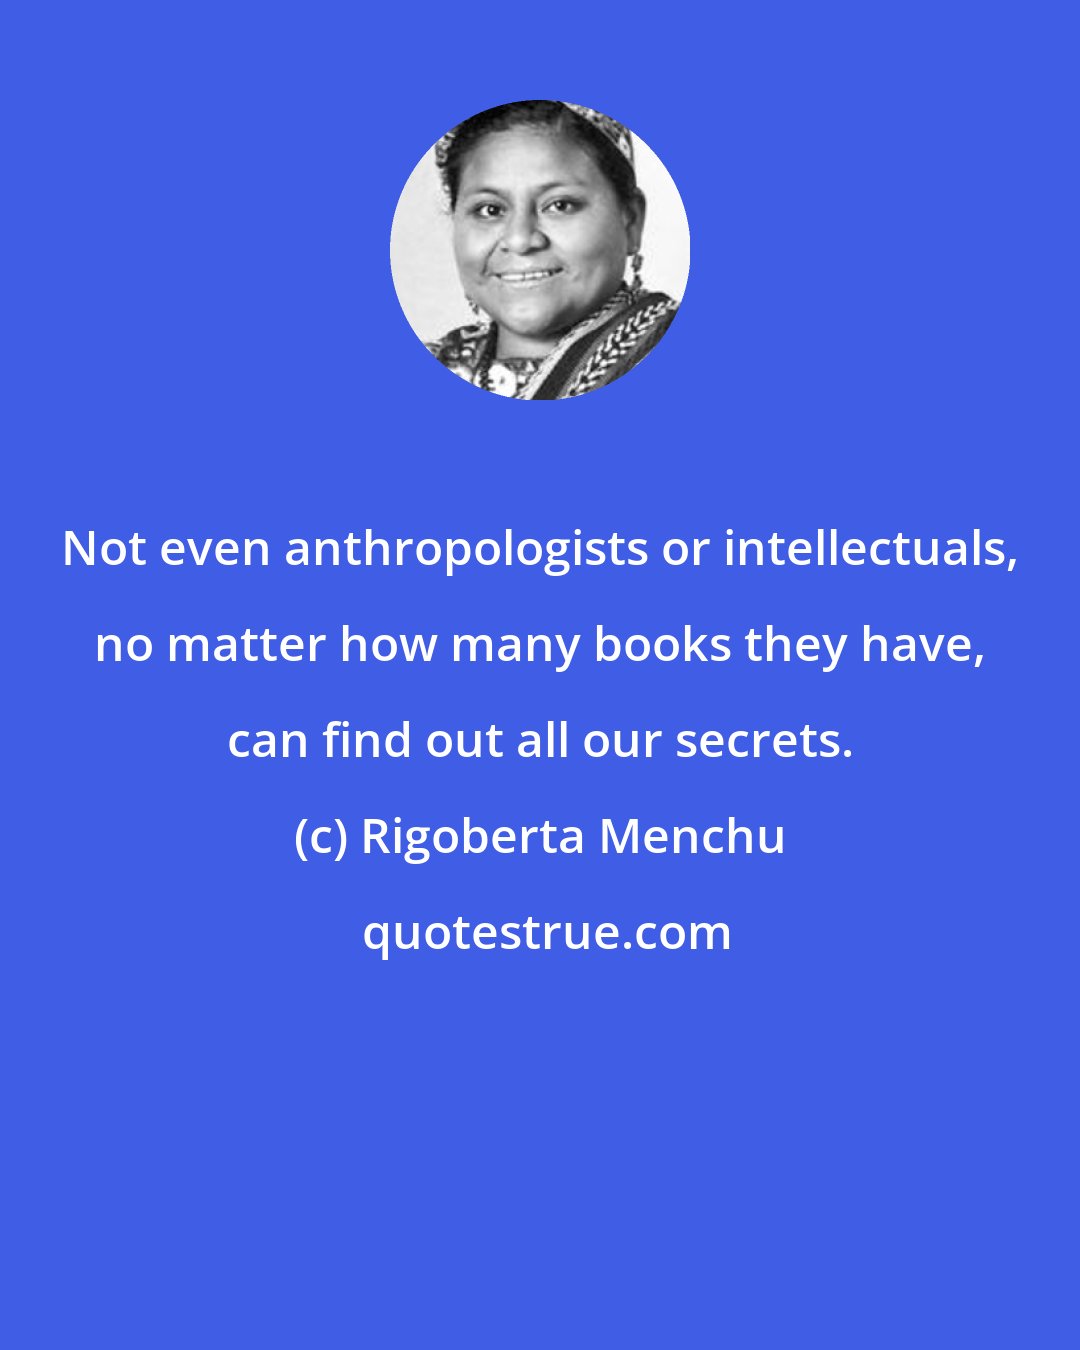 Rigoberta Menchu: Not even anthropologists or intellectuals, no matter how many books they have, can find out all our secrets.